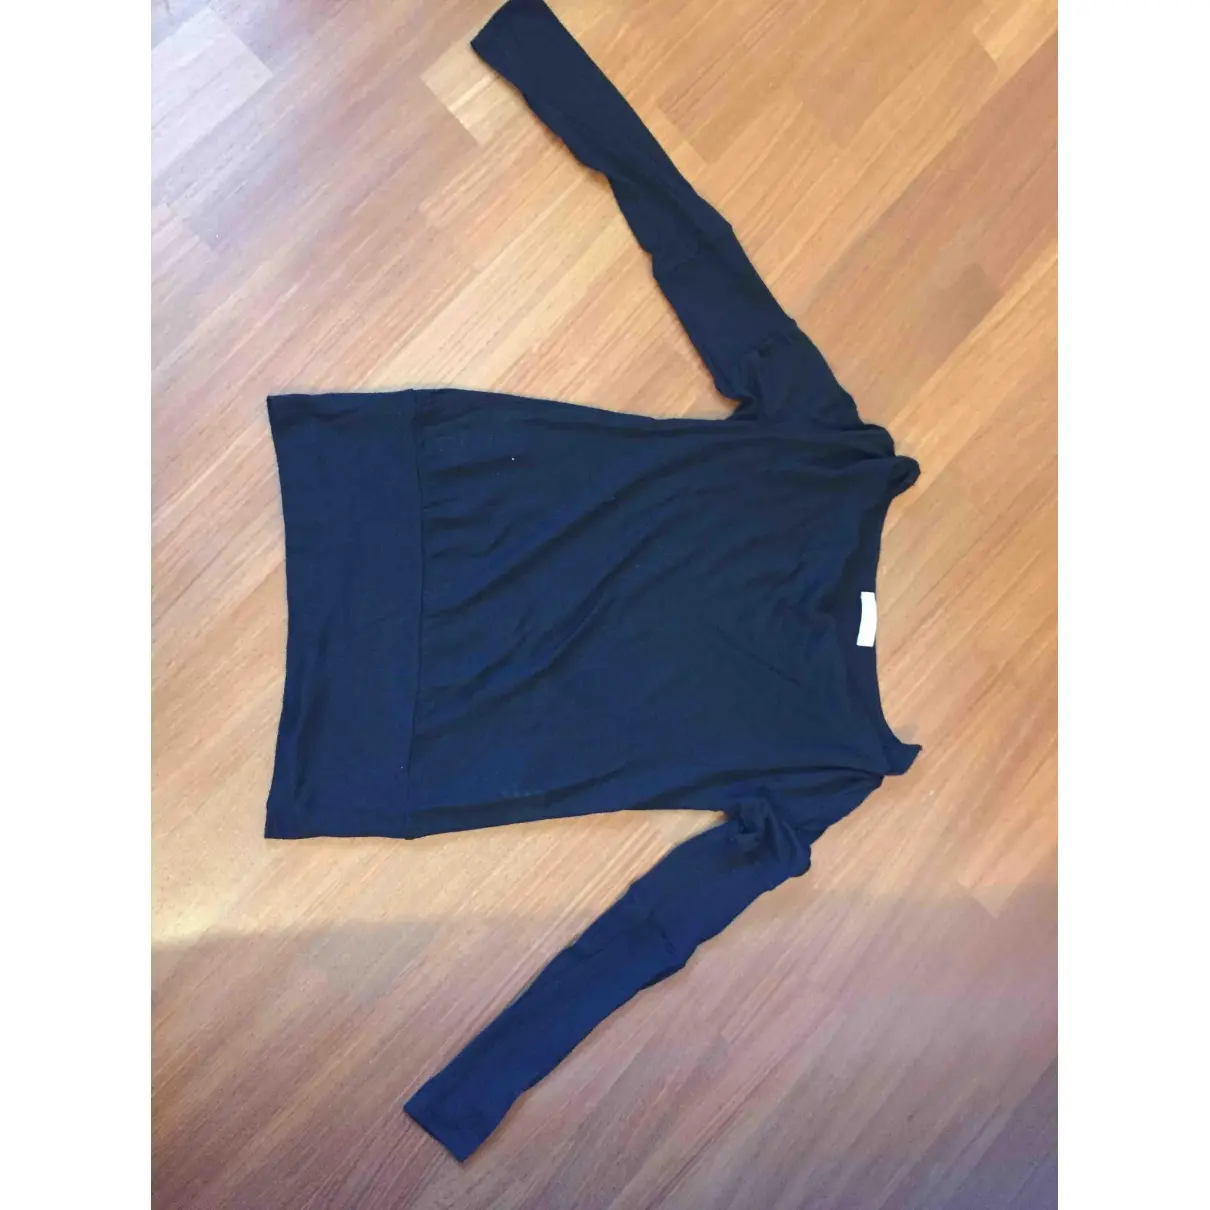 Costume National Wool jersey top for sale - Vintage